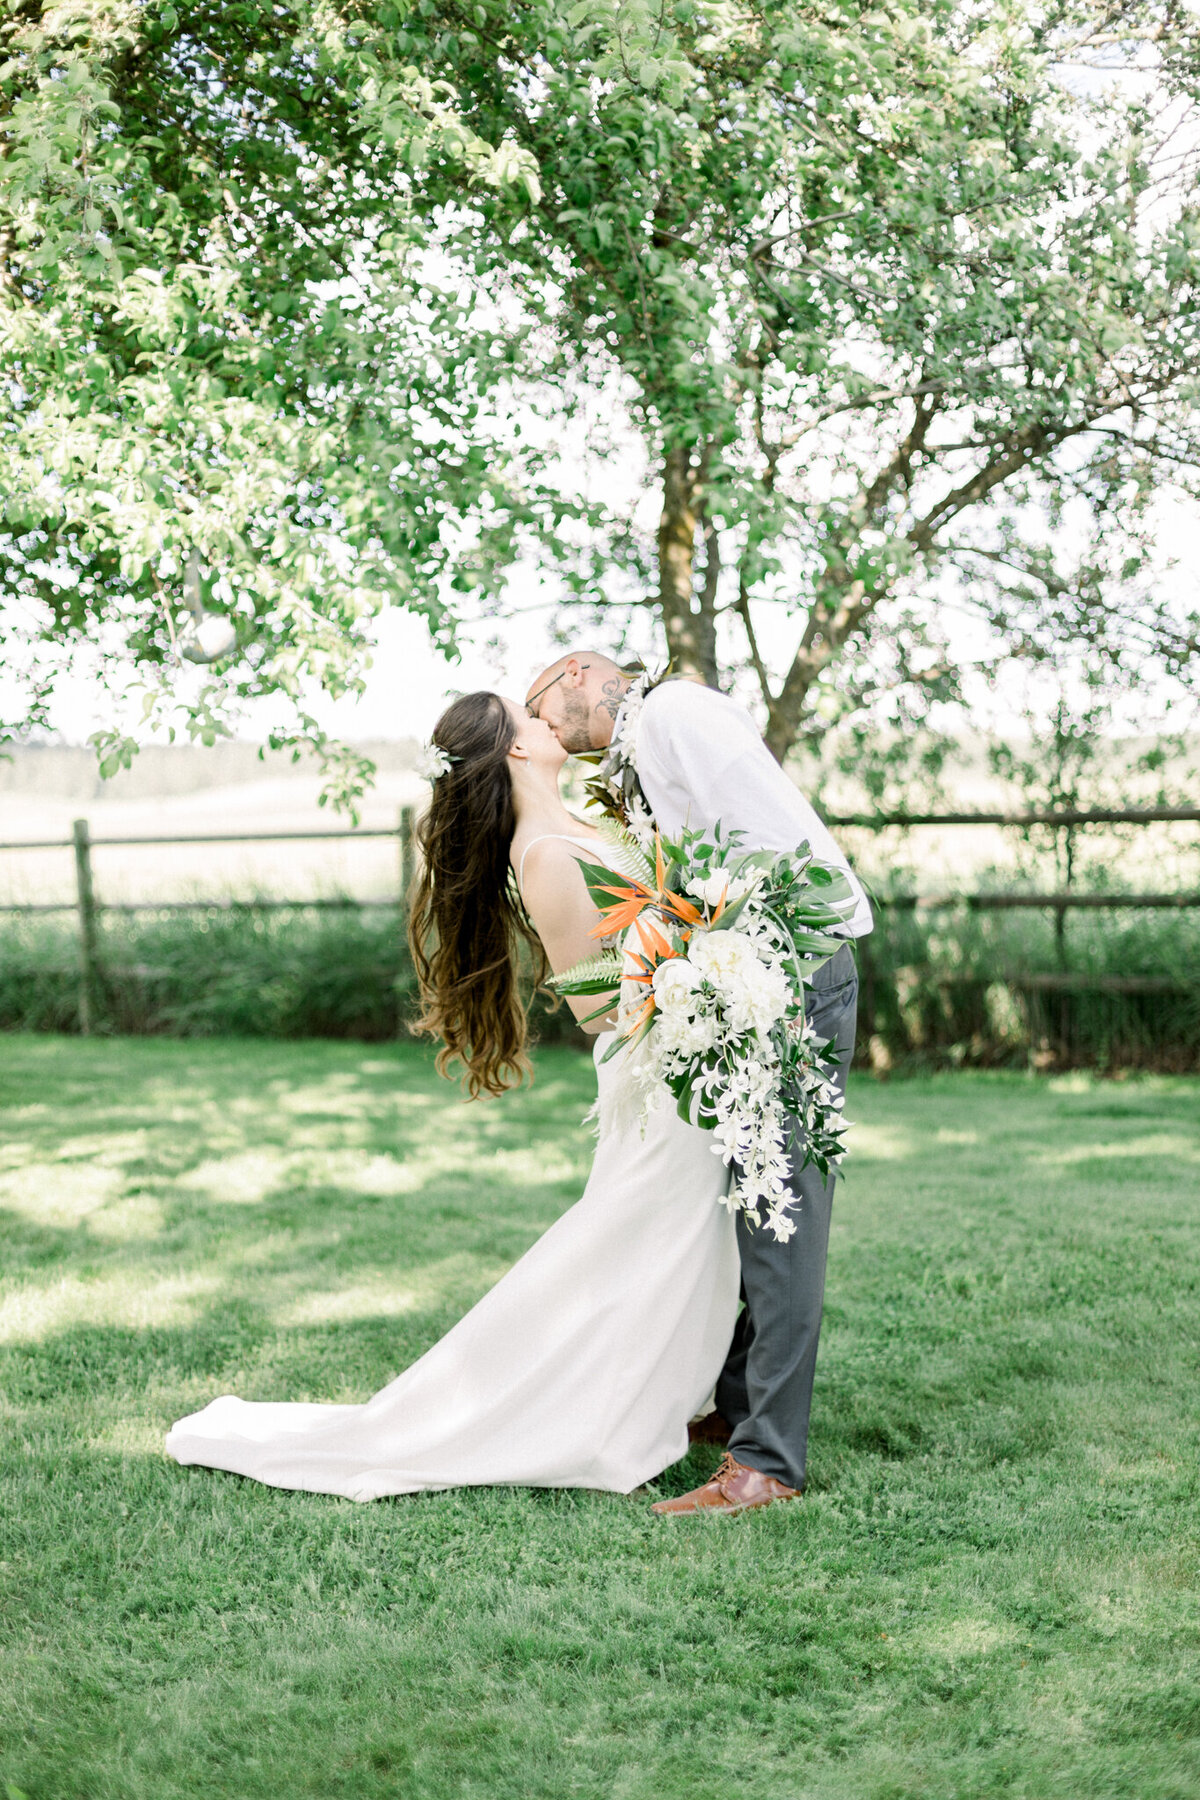 Bride and groom sharing a kiss on their wedding day taken by spokane wedding photographer